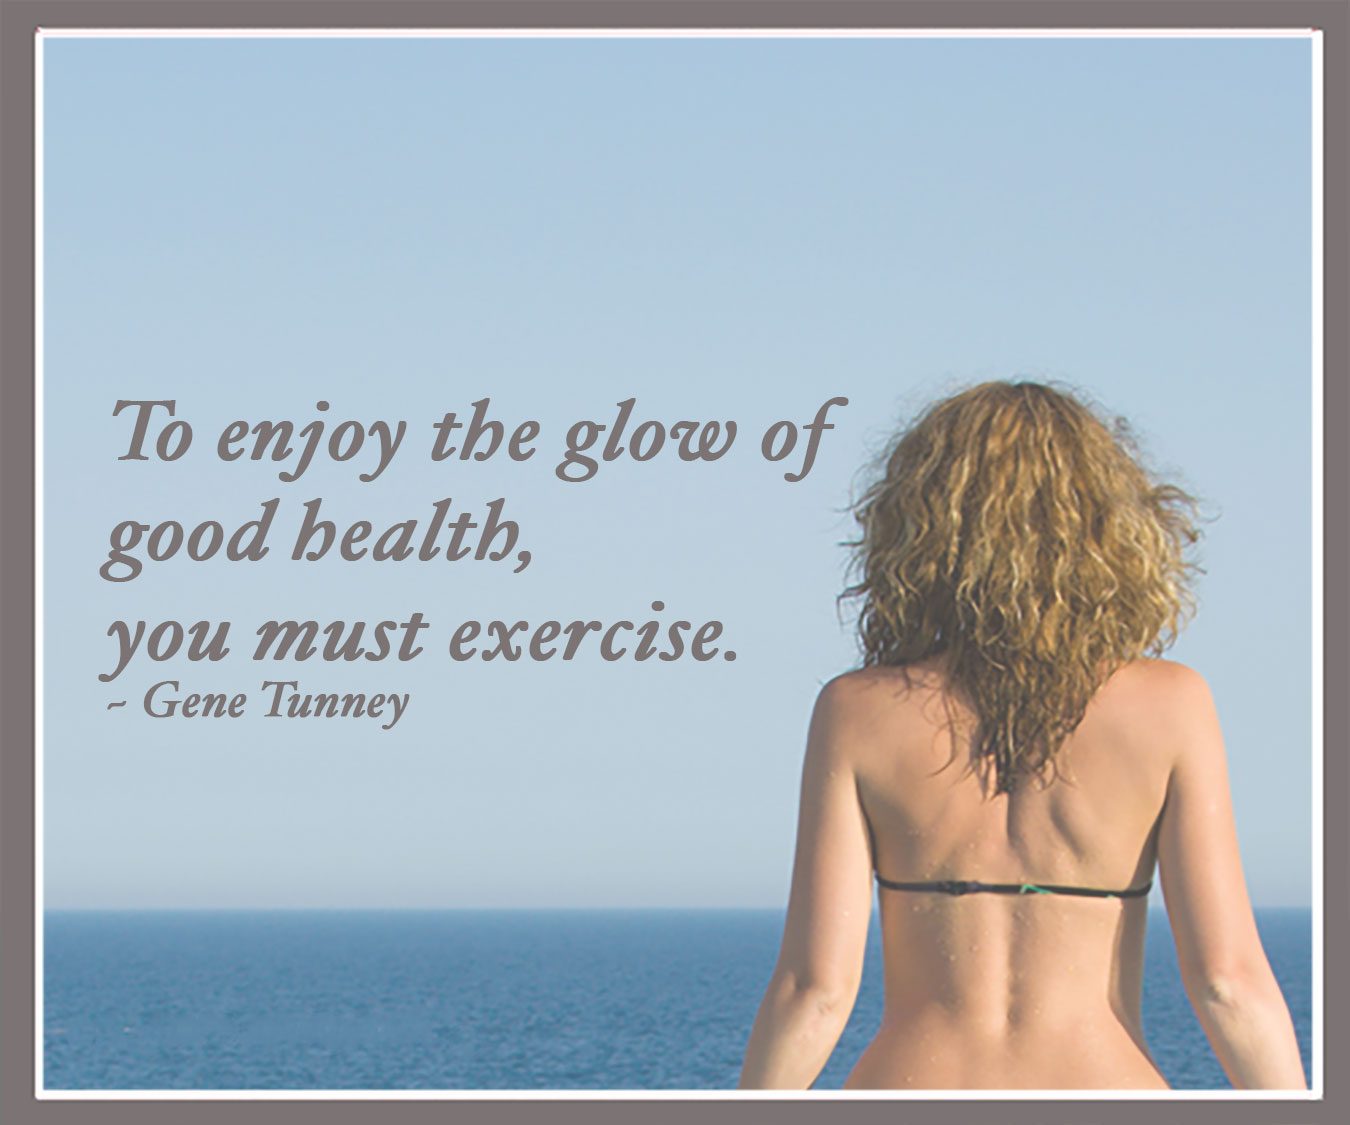 Good Health - Living Fit Lifestyle